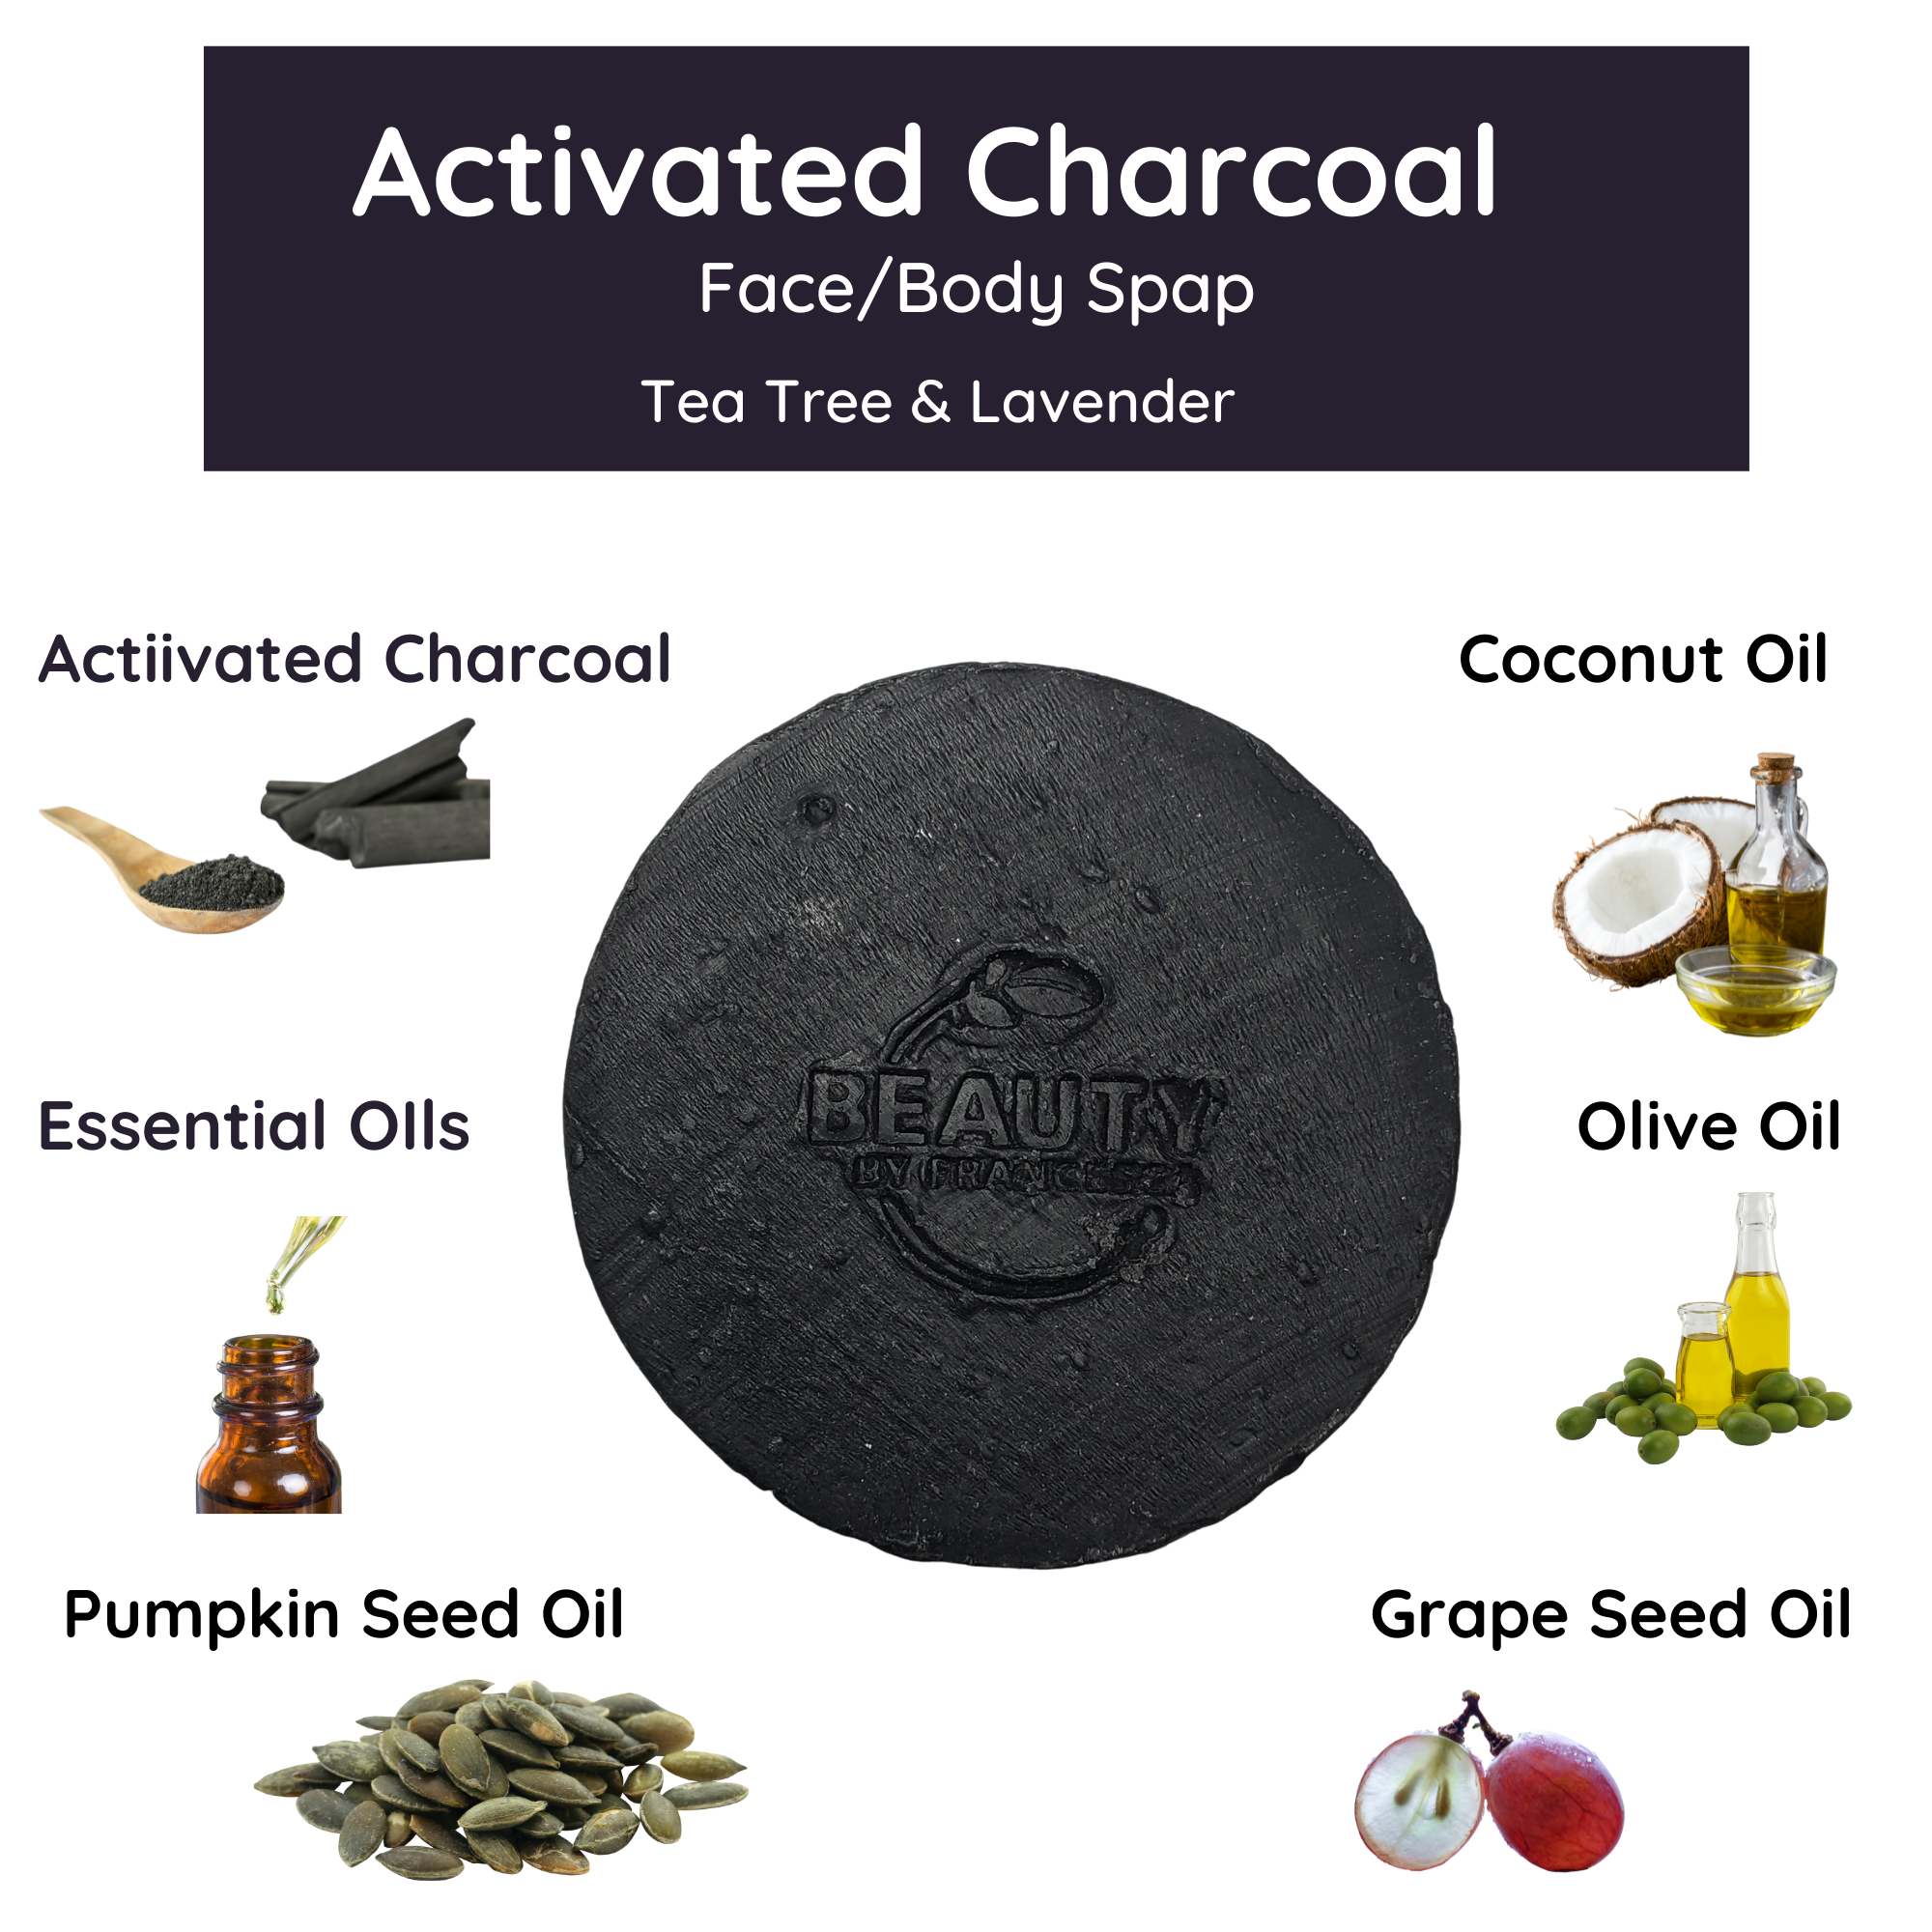 Activated Charcoal Face and Body Soap with Tea Tree and Lavender Ingredients